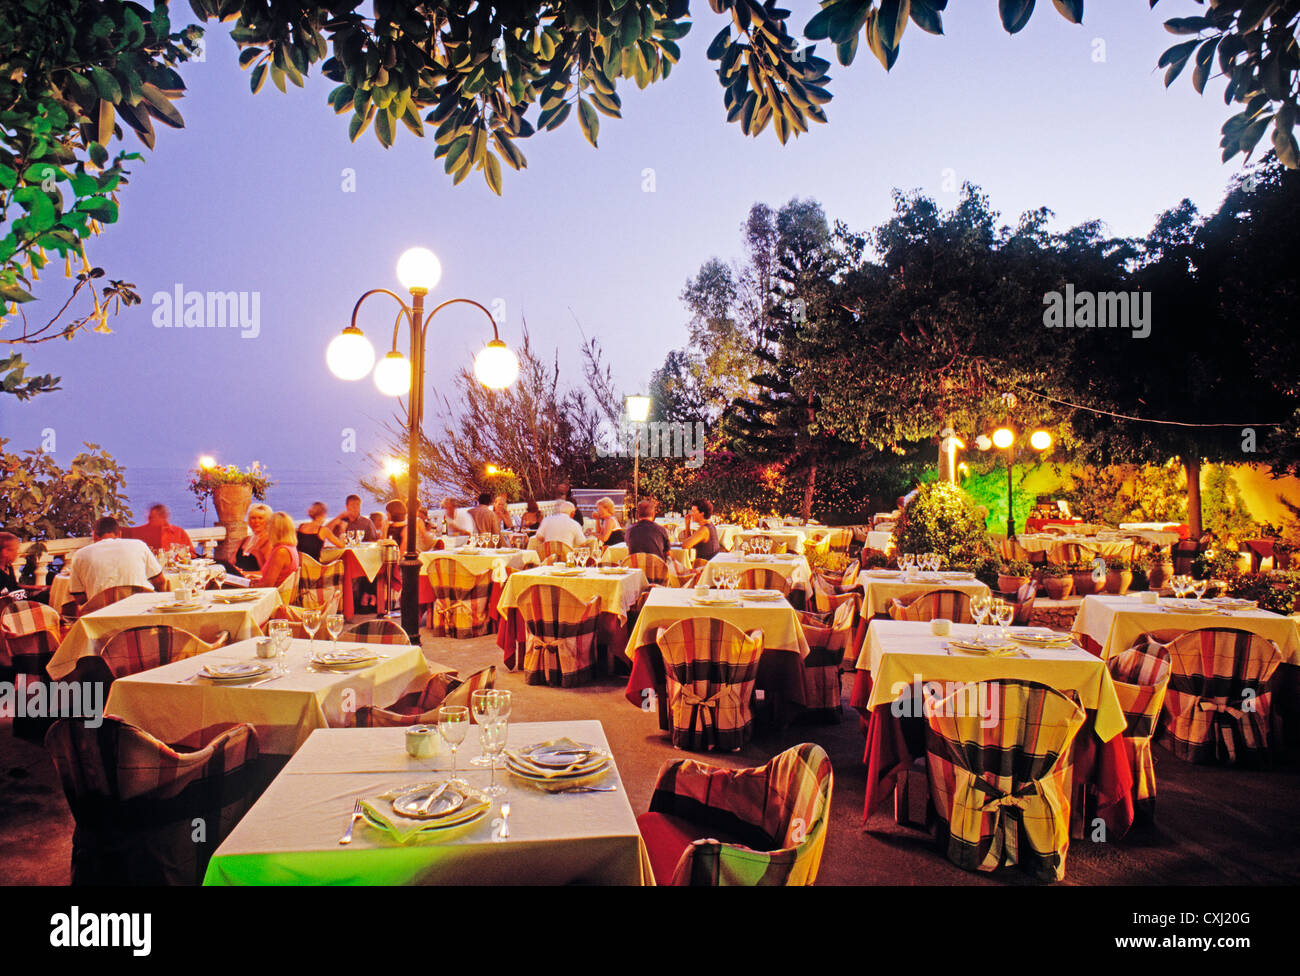 dinner at dusk in a restaurant next to the Mediterranean Sea nerja malaga costa del sol Andalusia Spain restaurante andalucia Stock Photo